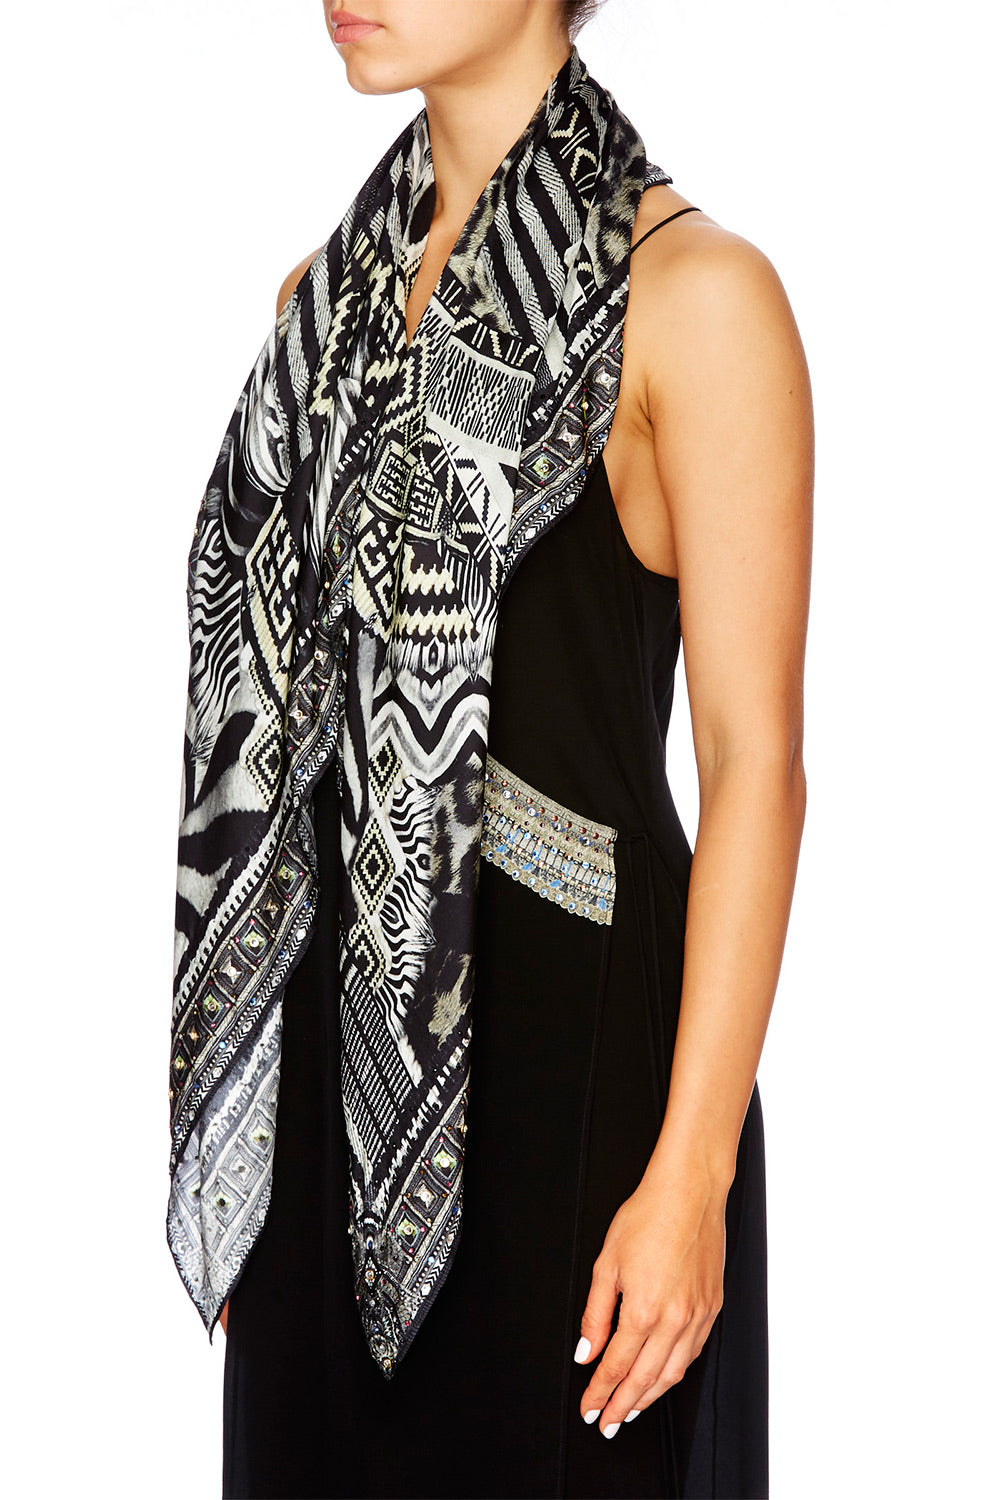 TRIBAL THEORY LARGE SQUARE SCARF